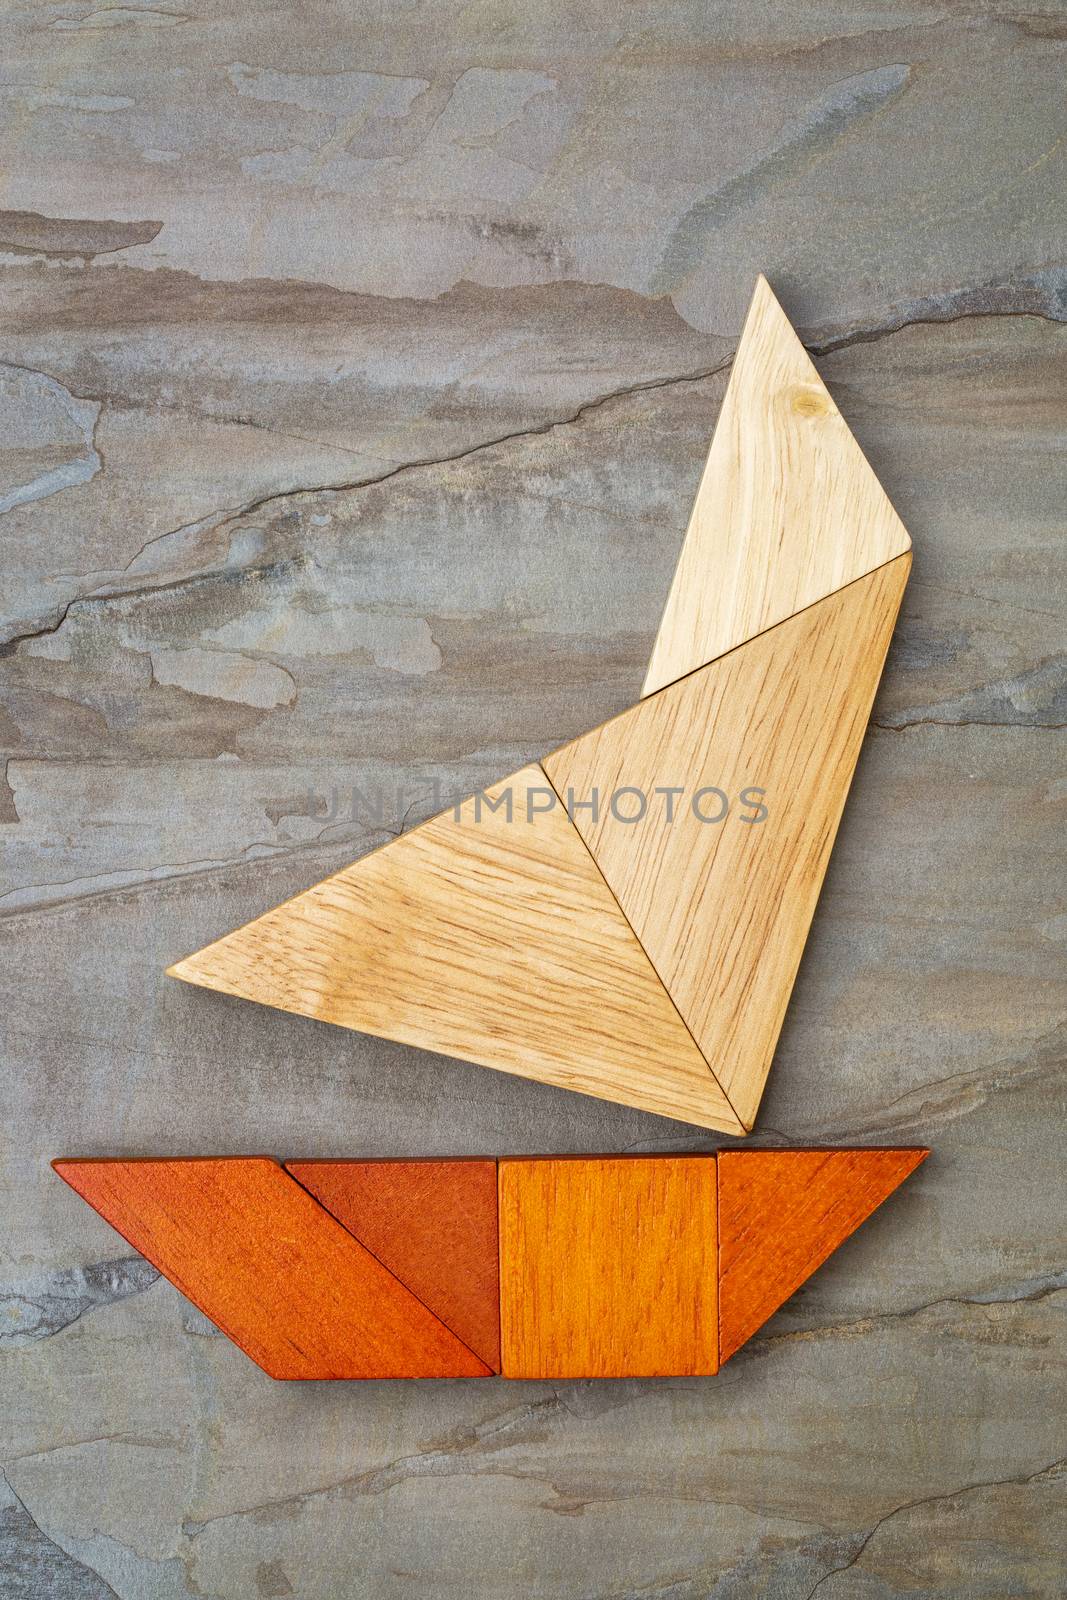 abstract picture of a sailing yacht built from seven tangram wooden pieces over a slate rock background, artwork created by the photographer